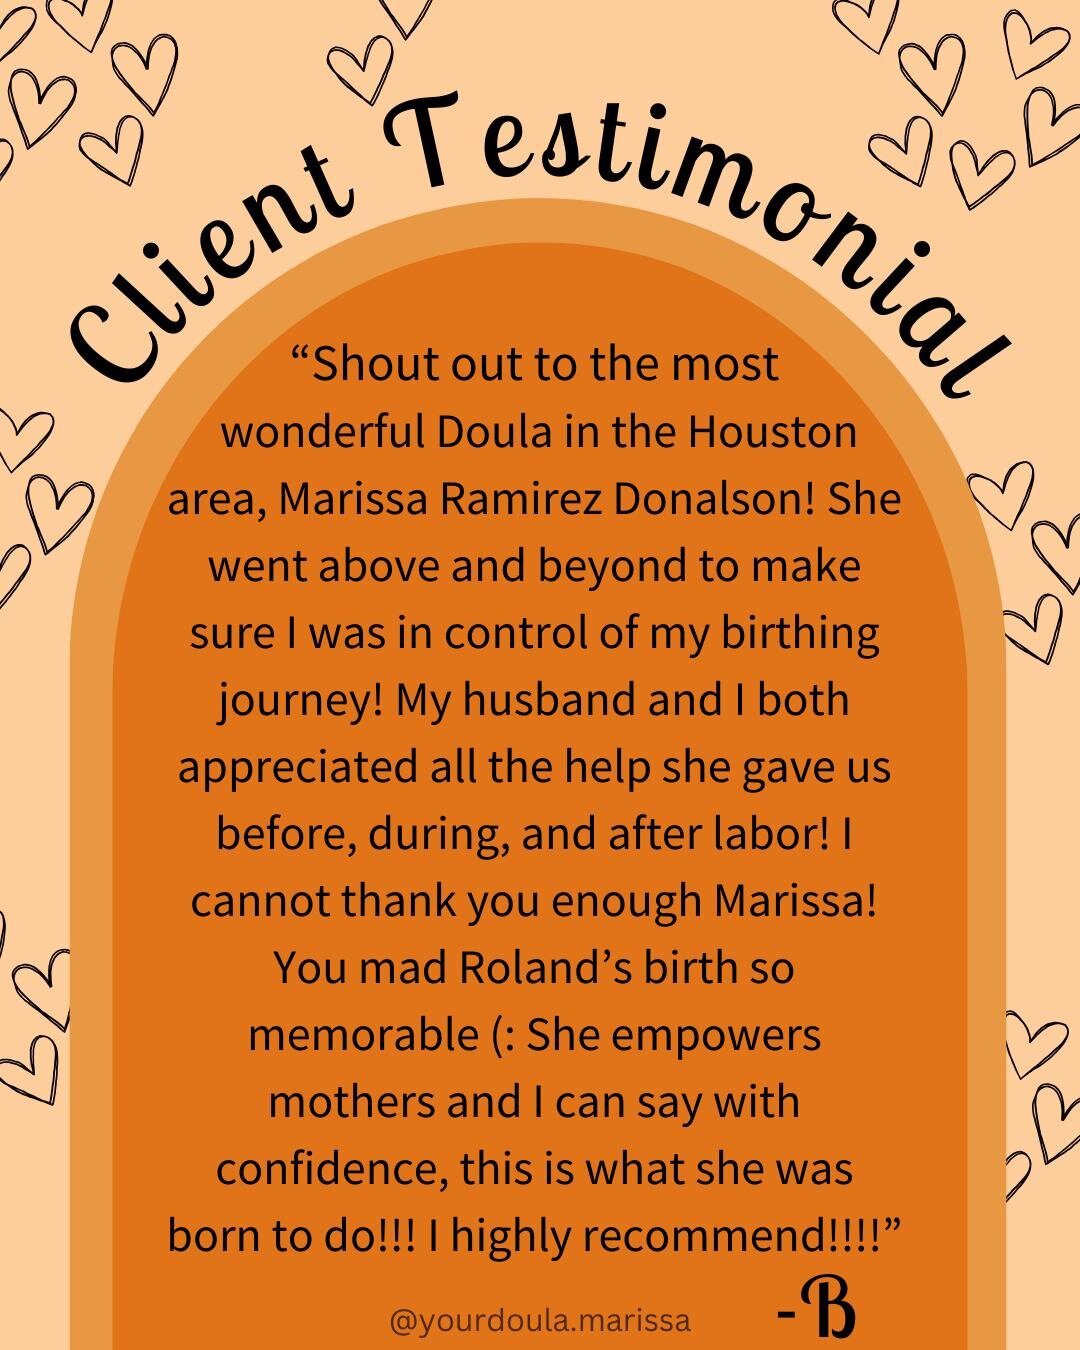 ✨Client Testimonial Spotlight ✨

This review gets me choked up every time I read it. I just know ill be looking back at this during my career to affirm I'm exactly where I'm supposed to be.
Love you B 🧡

----------------------
 #labordoula #pregnant